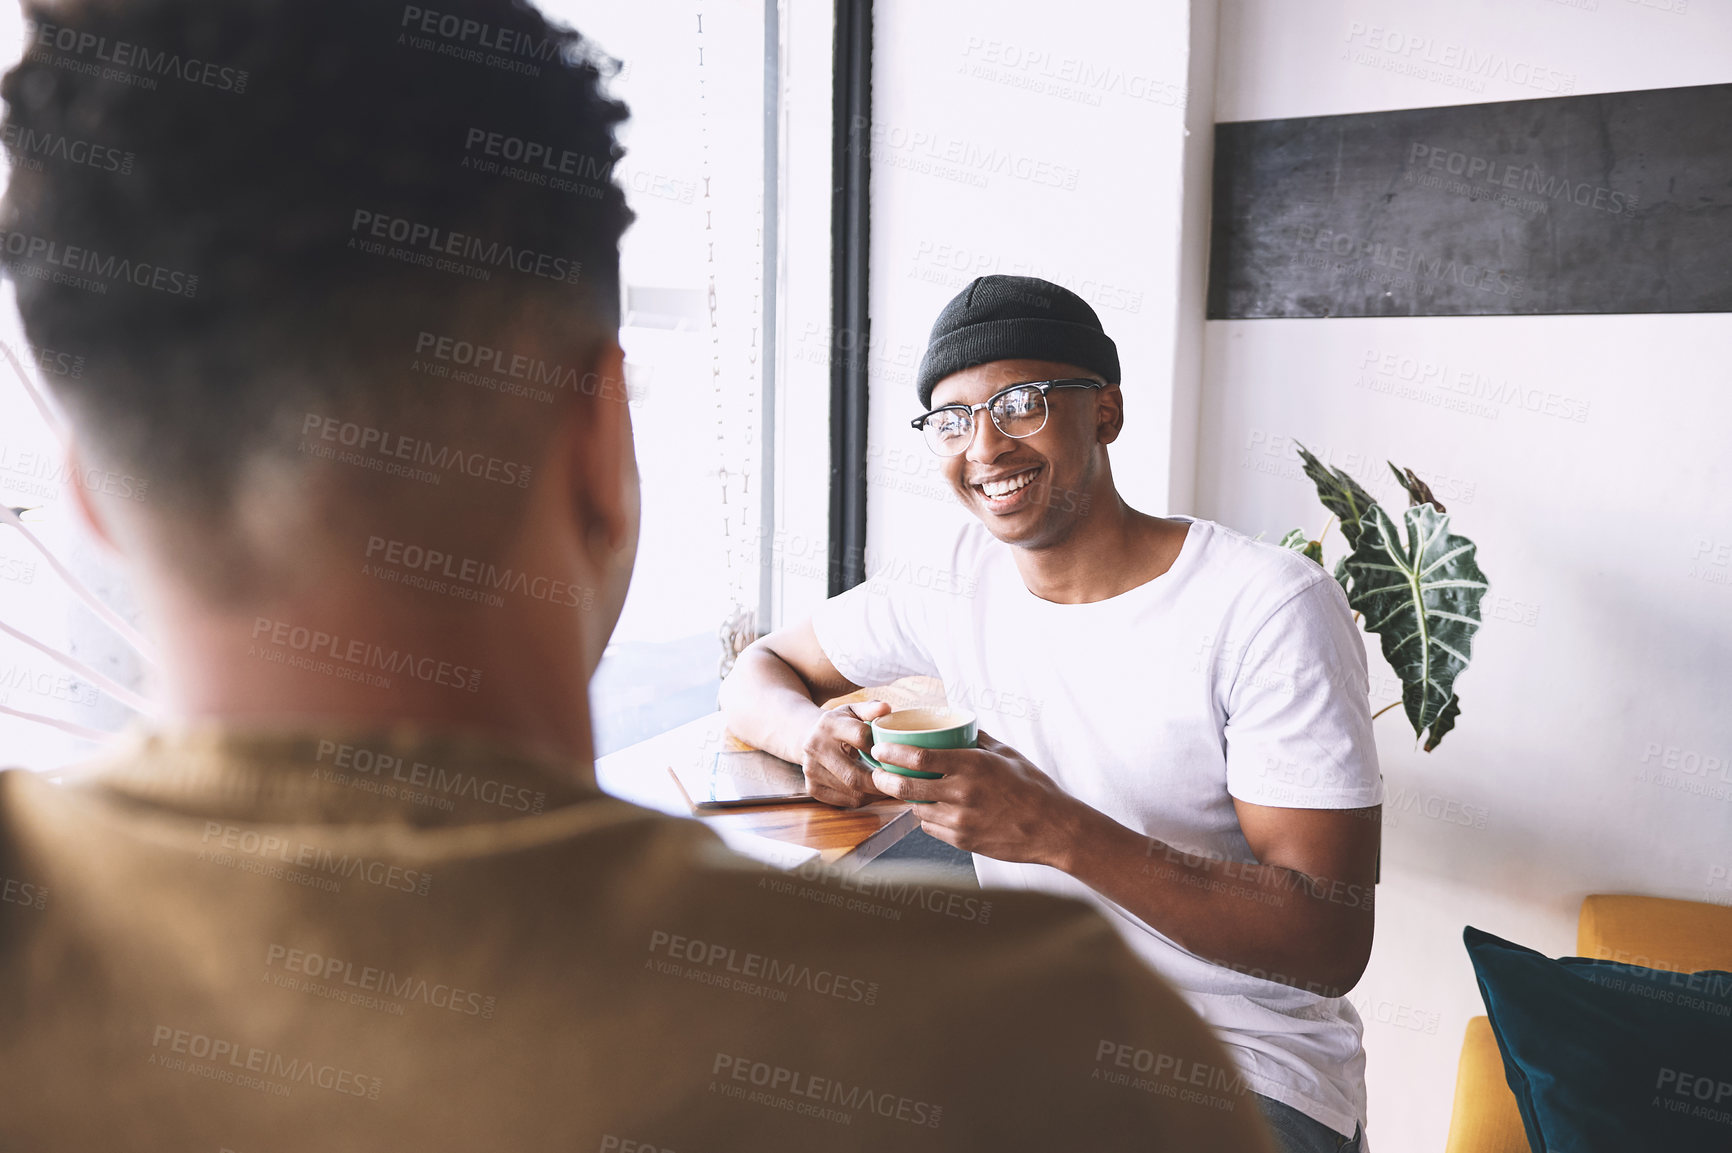 Buy stock photo Shot of two young men having coffee together in a cafe